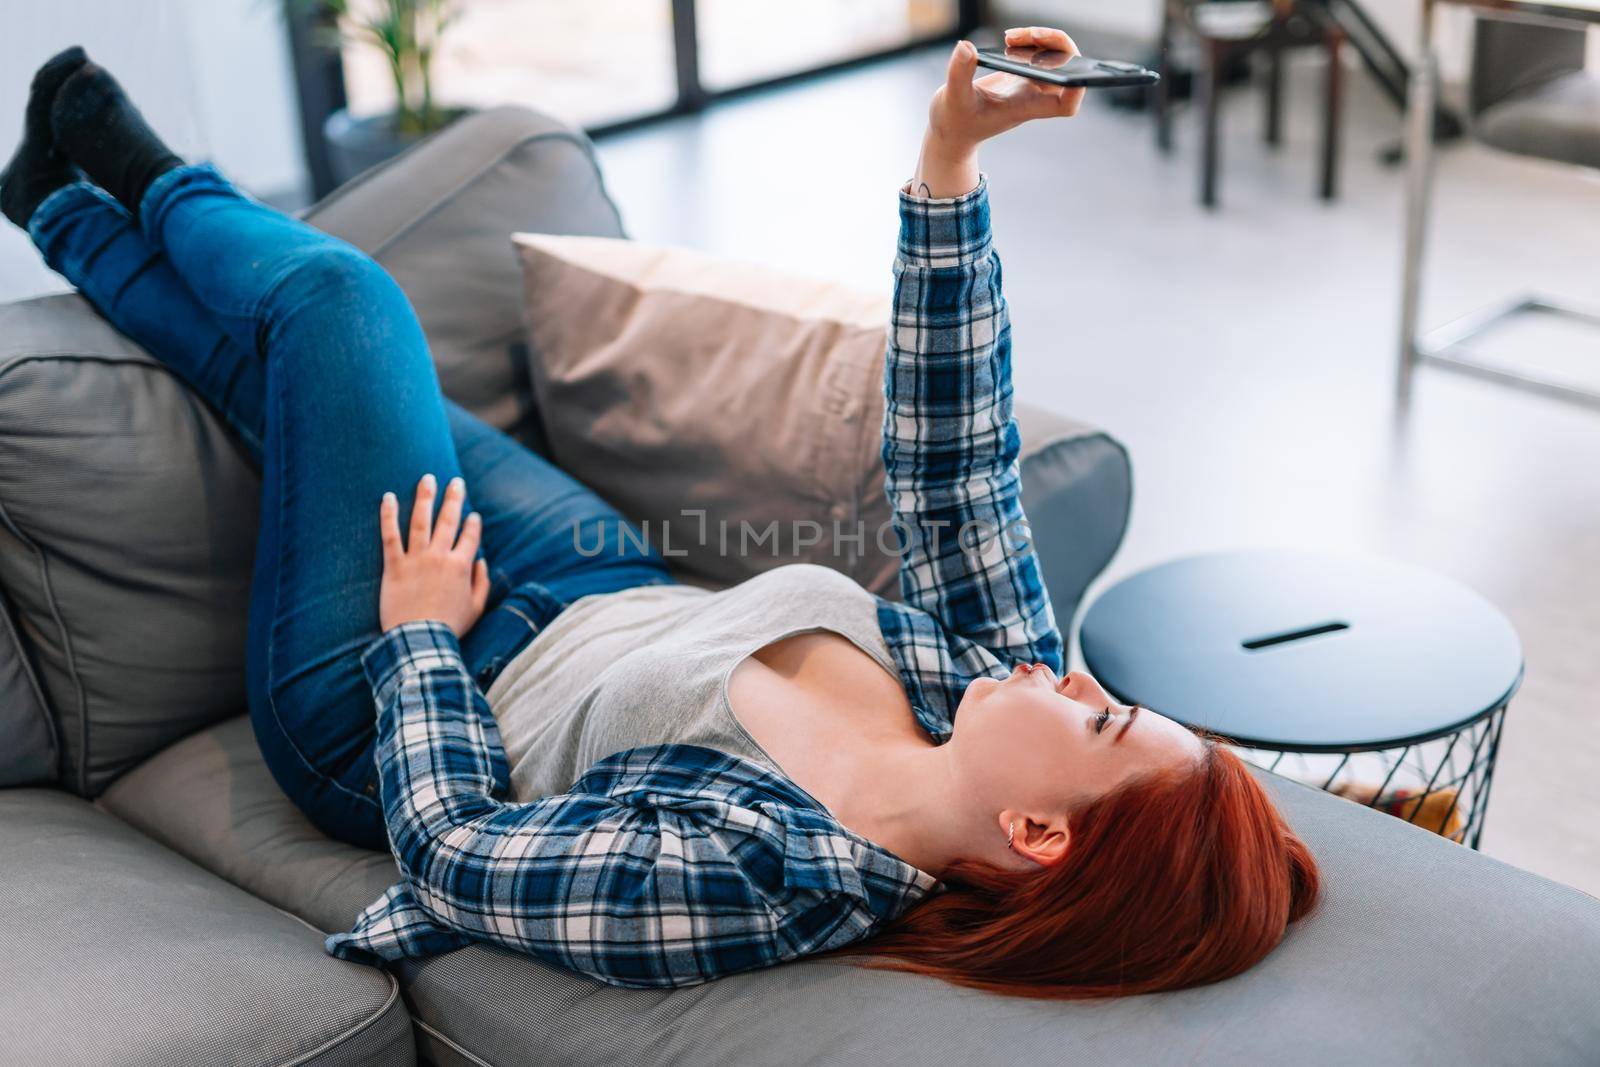 Young red-haired girl in jeans, grey T-shirt and blue shirt resting on the sofa in her living room at home. She is taking a selfie with her smartphone.